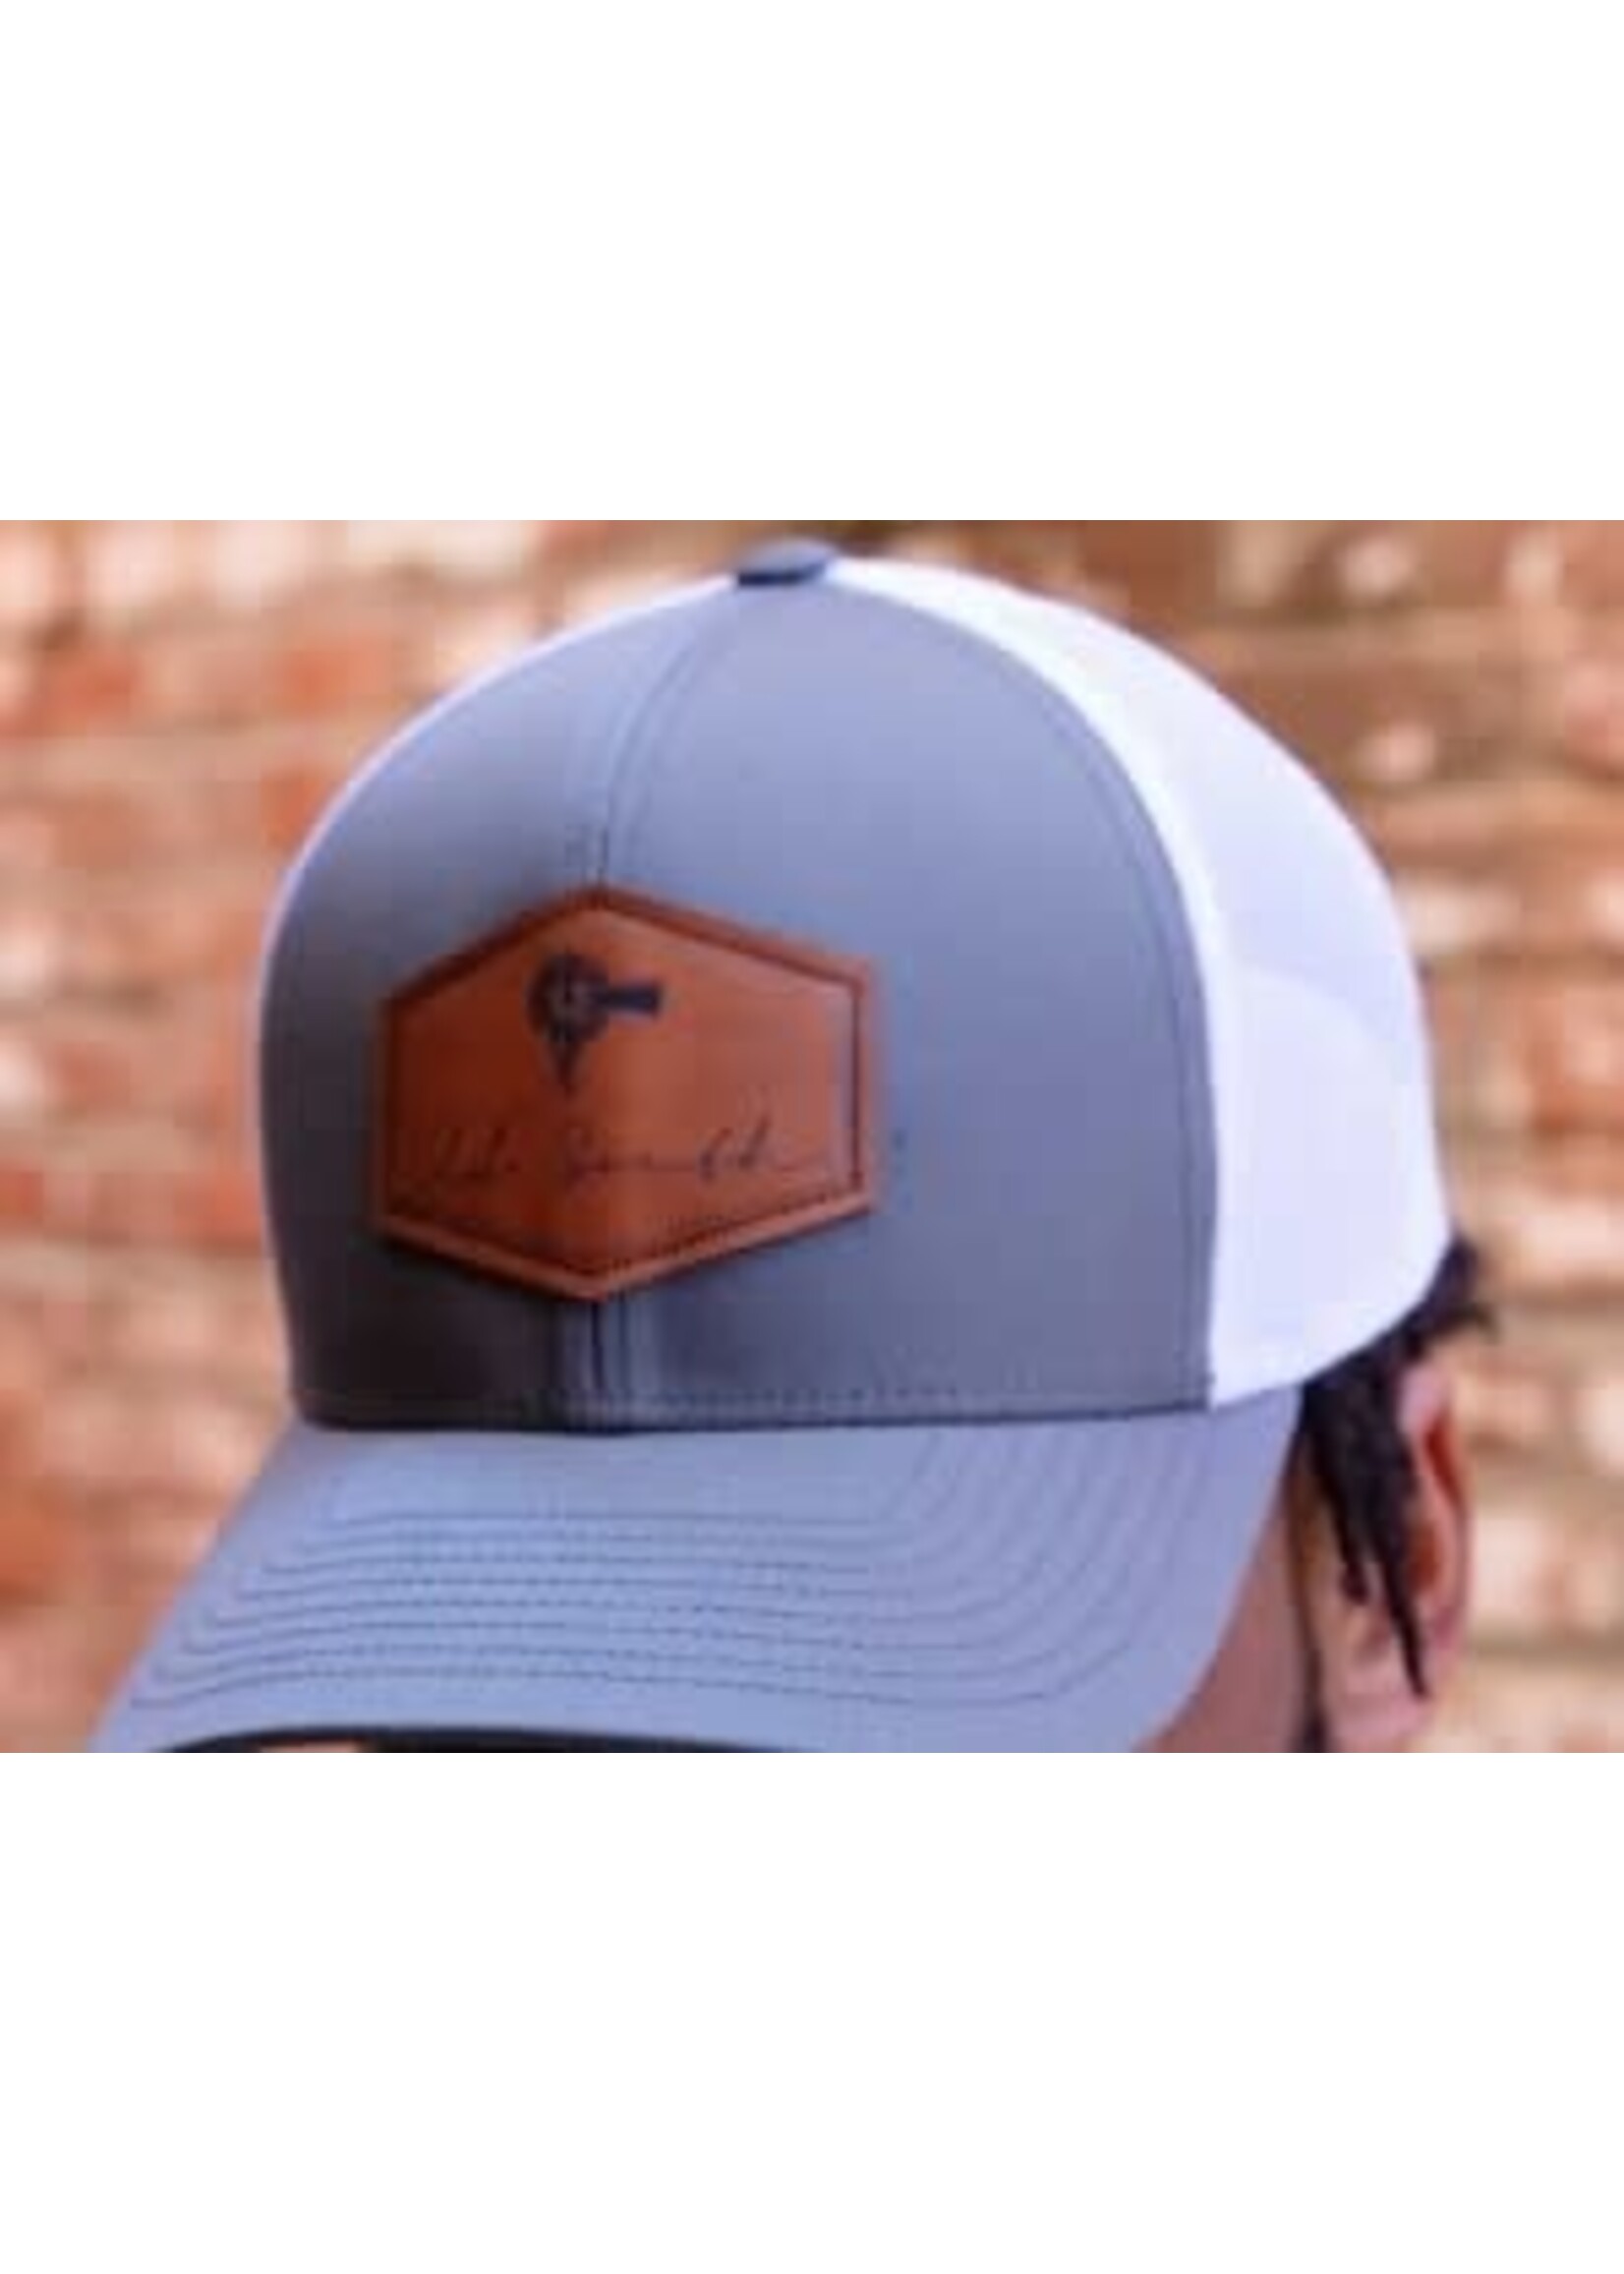 Old South Old South Trucker Hat